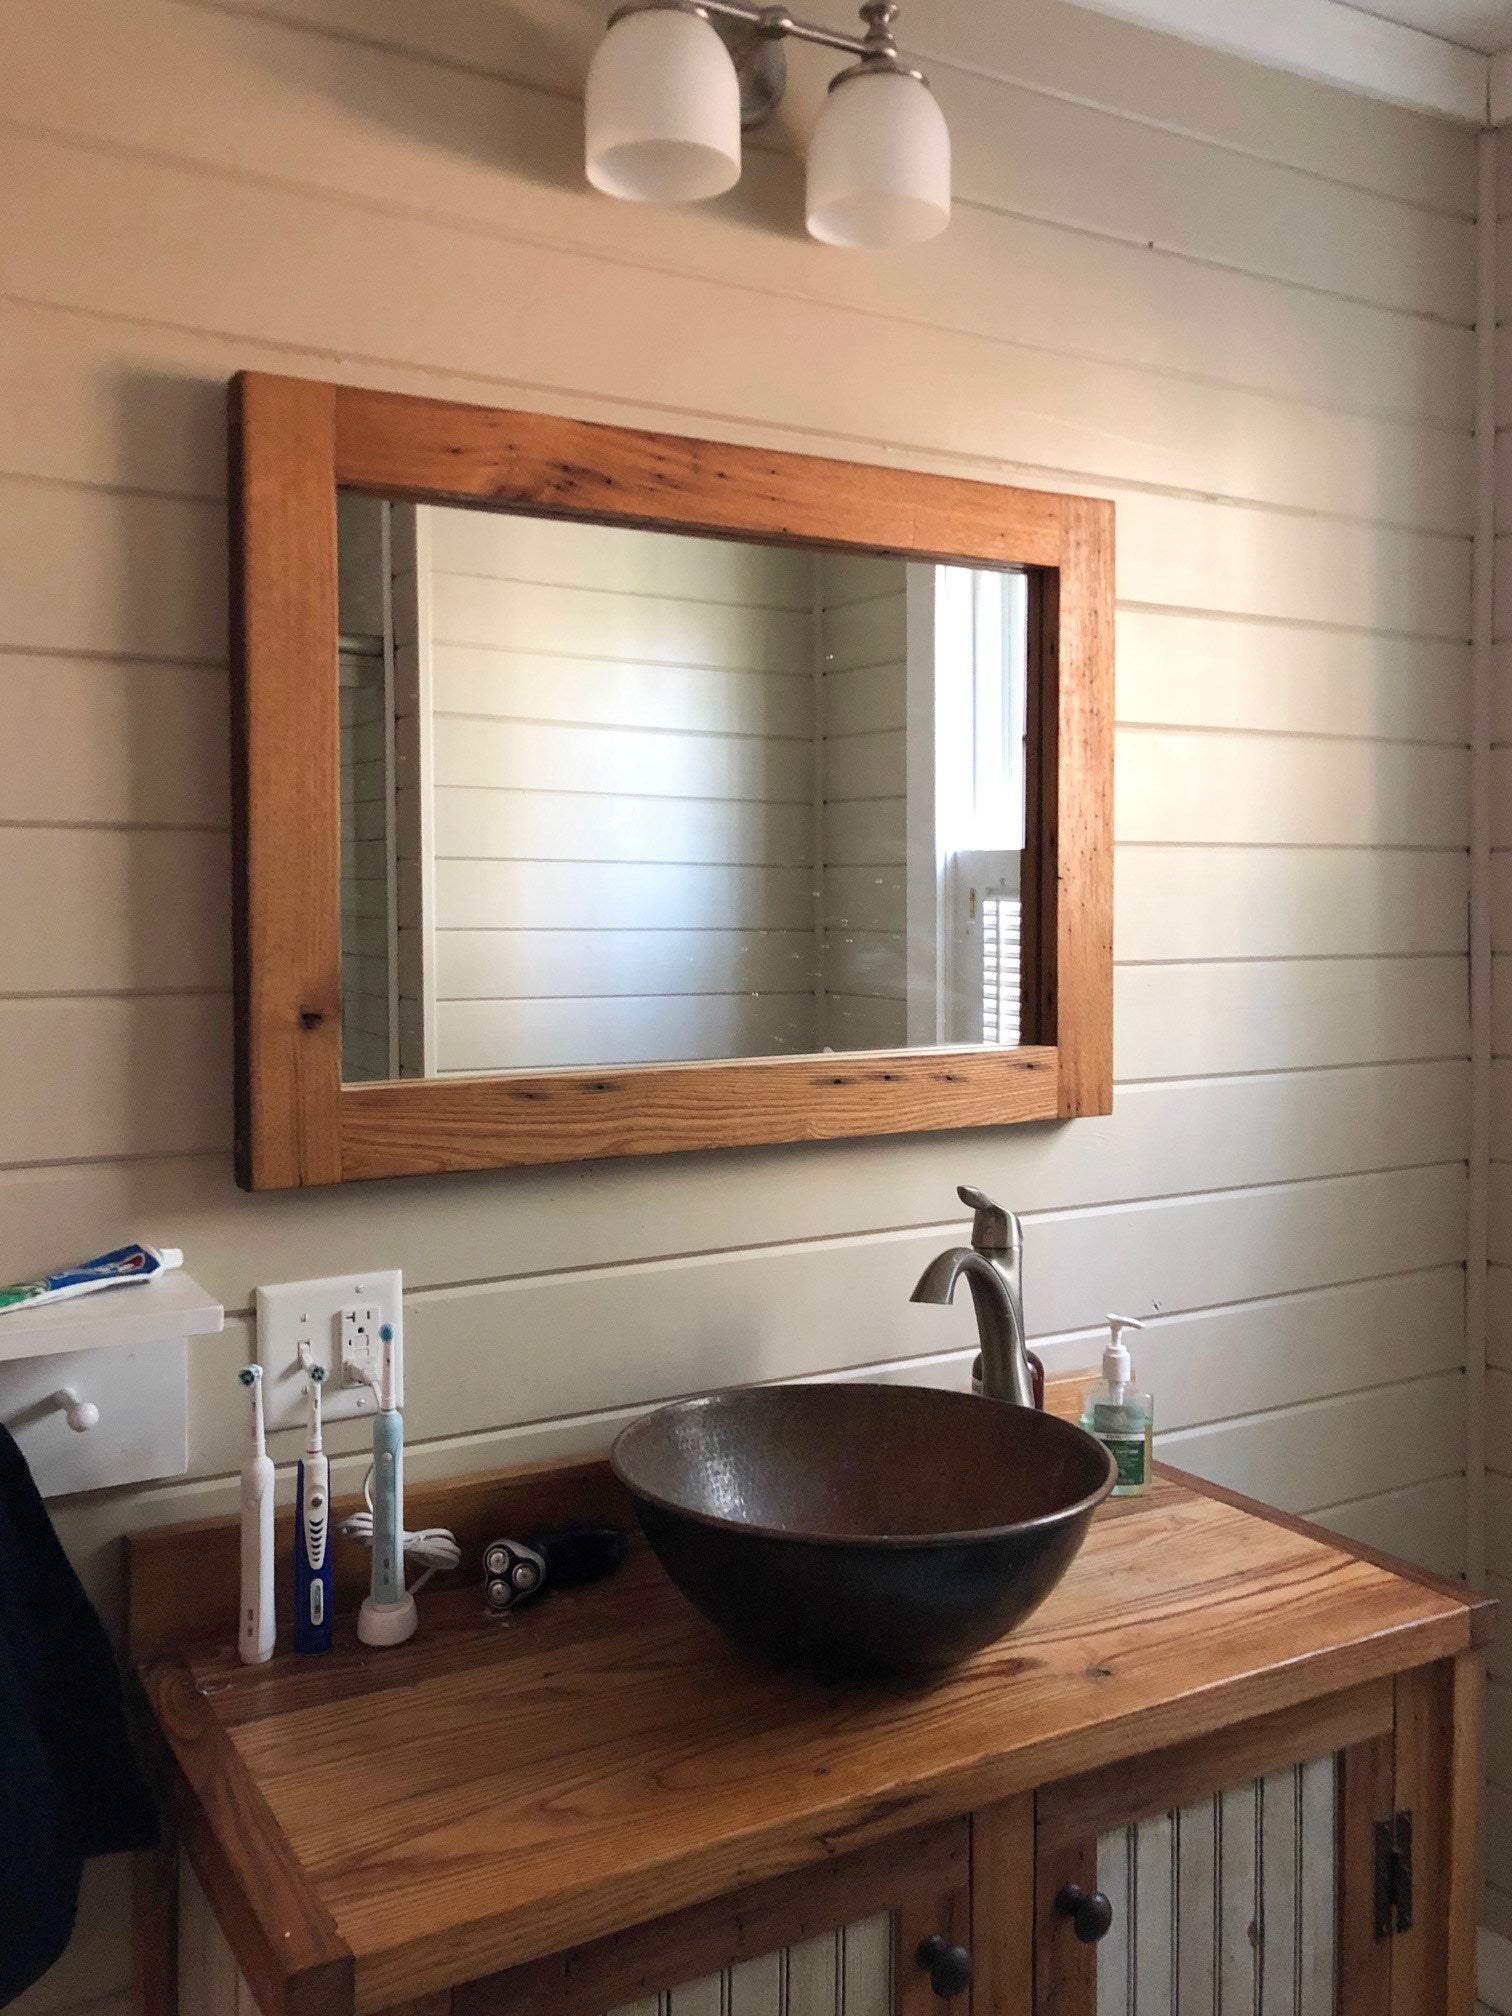 Piedmont (Pine) Bathroom | Before & After | Hygge & West